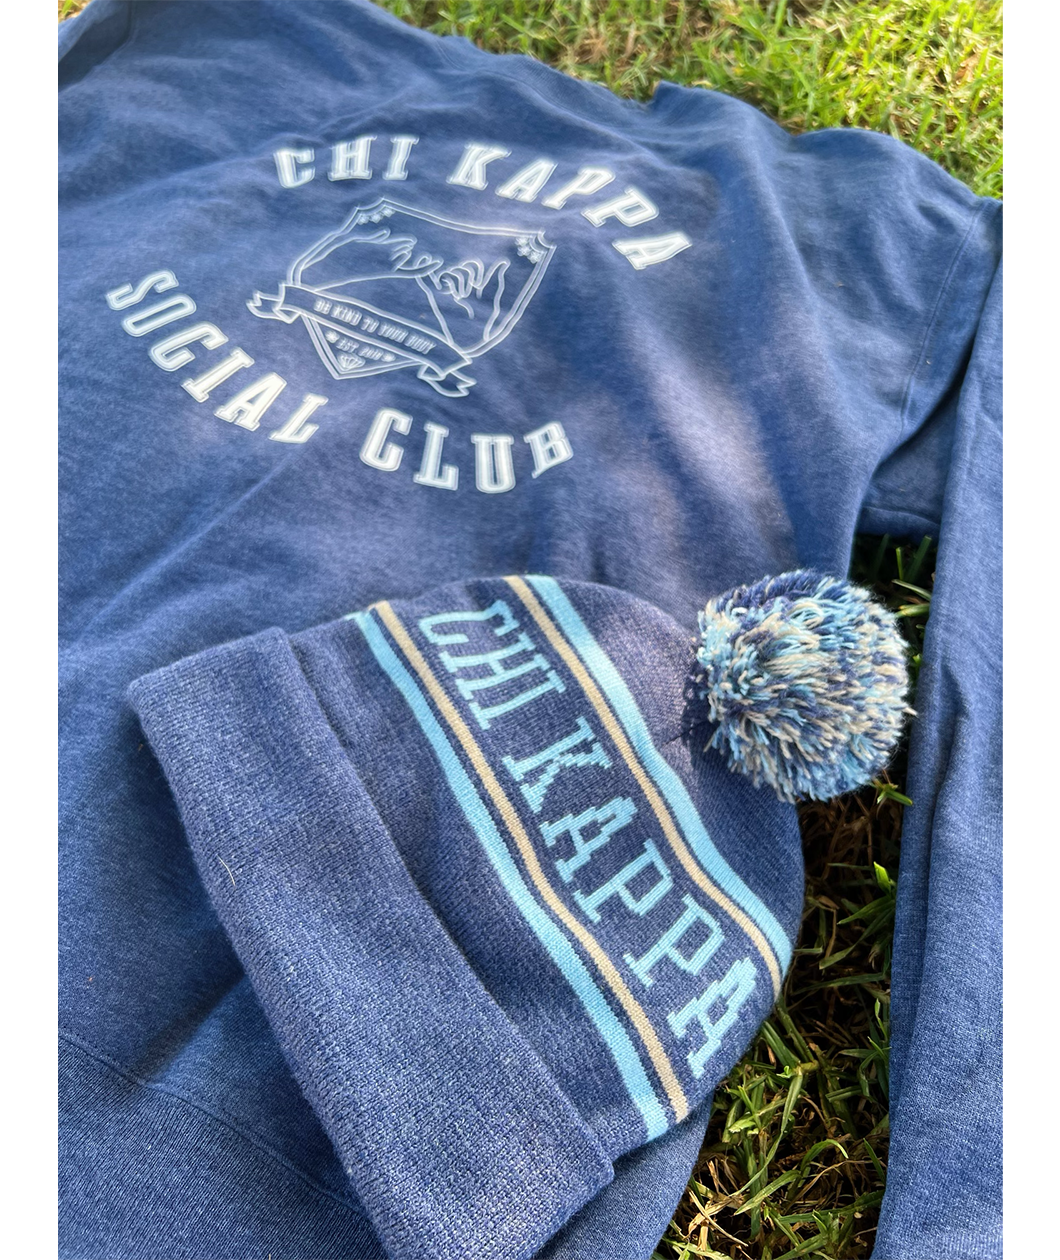 A blue knit beanie that reads "Chi Kappa" laying on top of a blue crewneck in the grass. From Sierra Schultzzie.